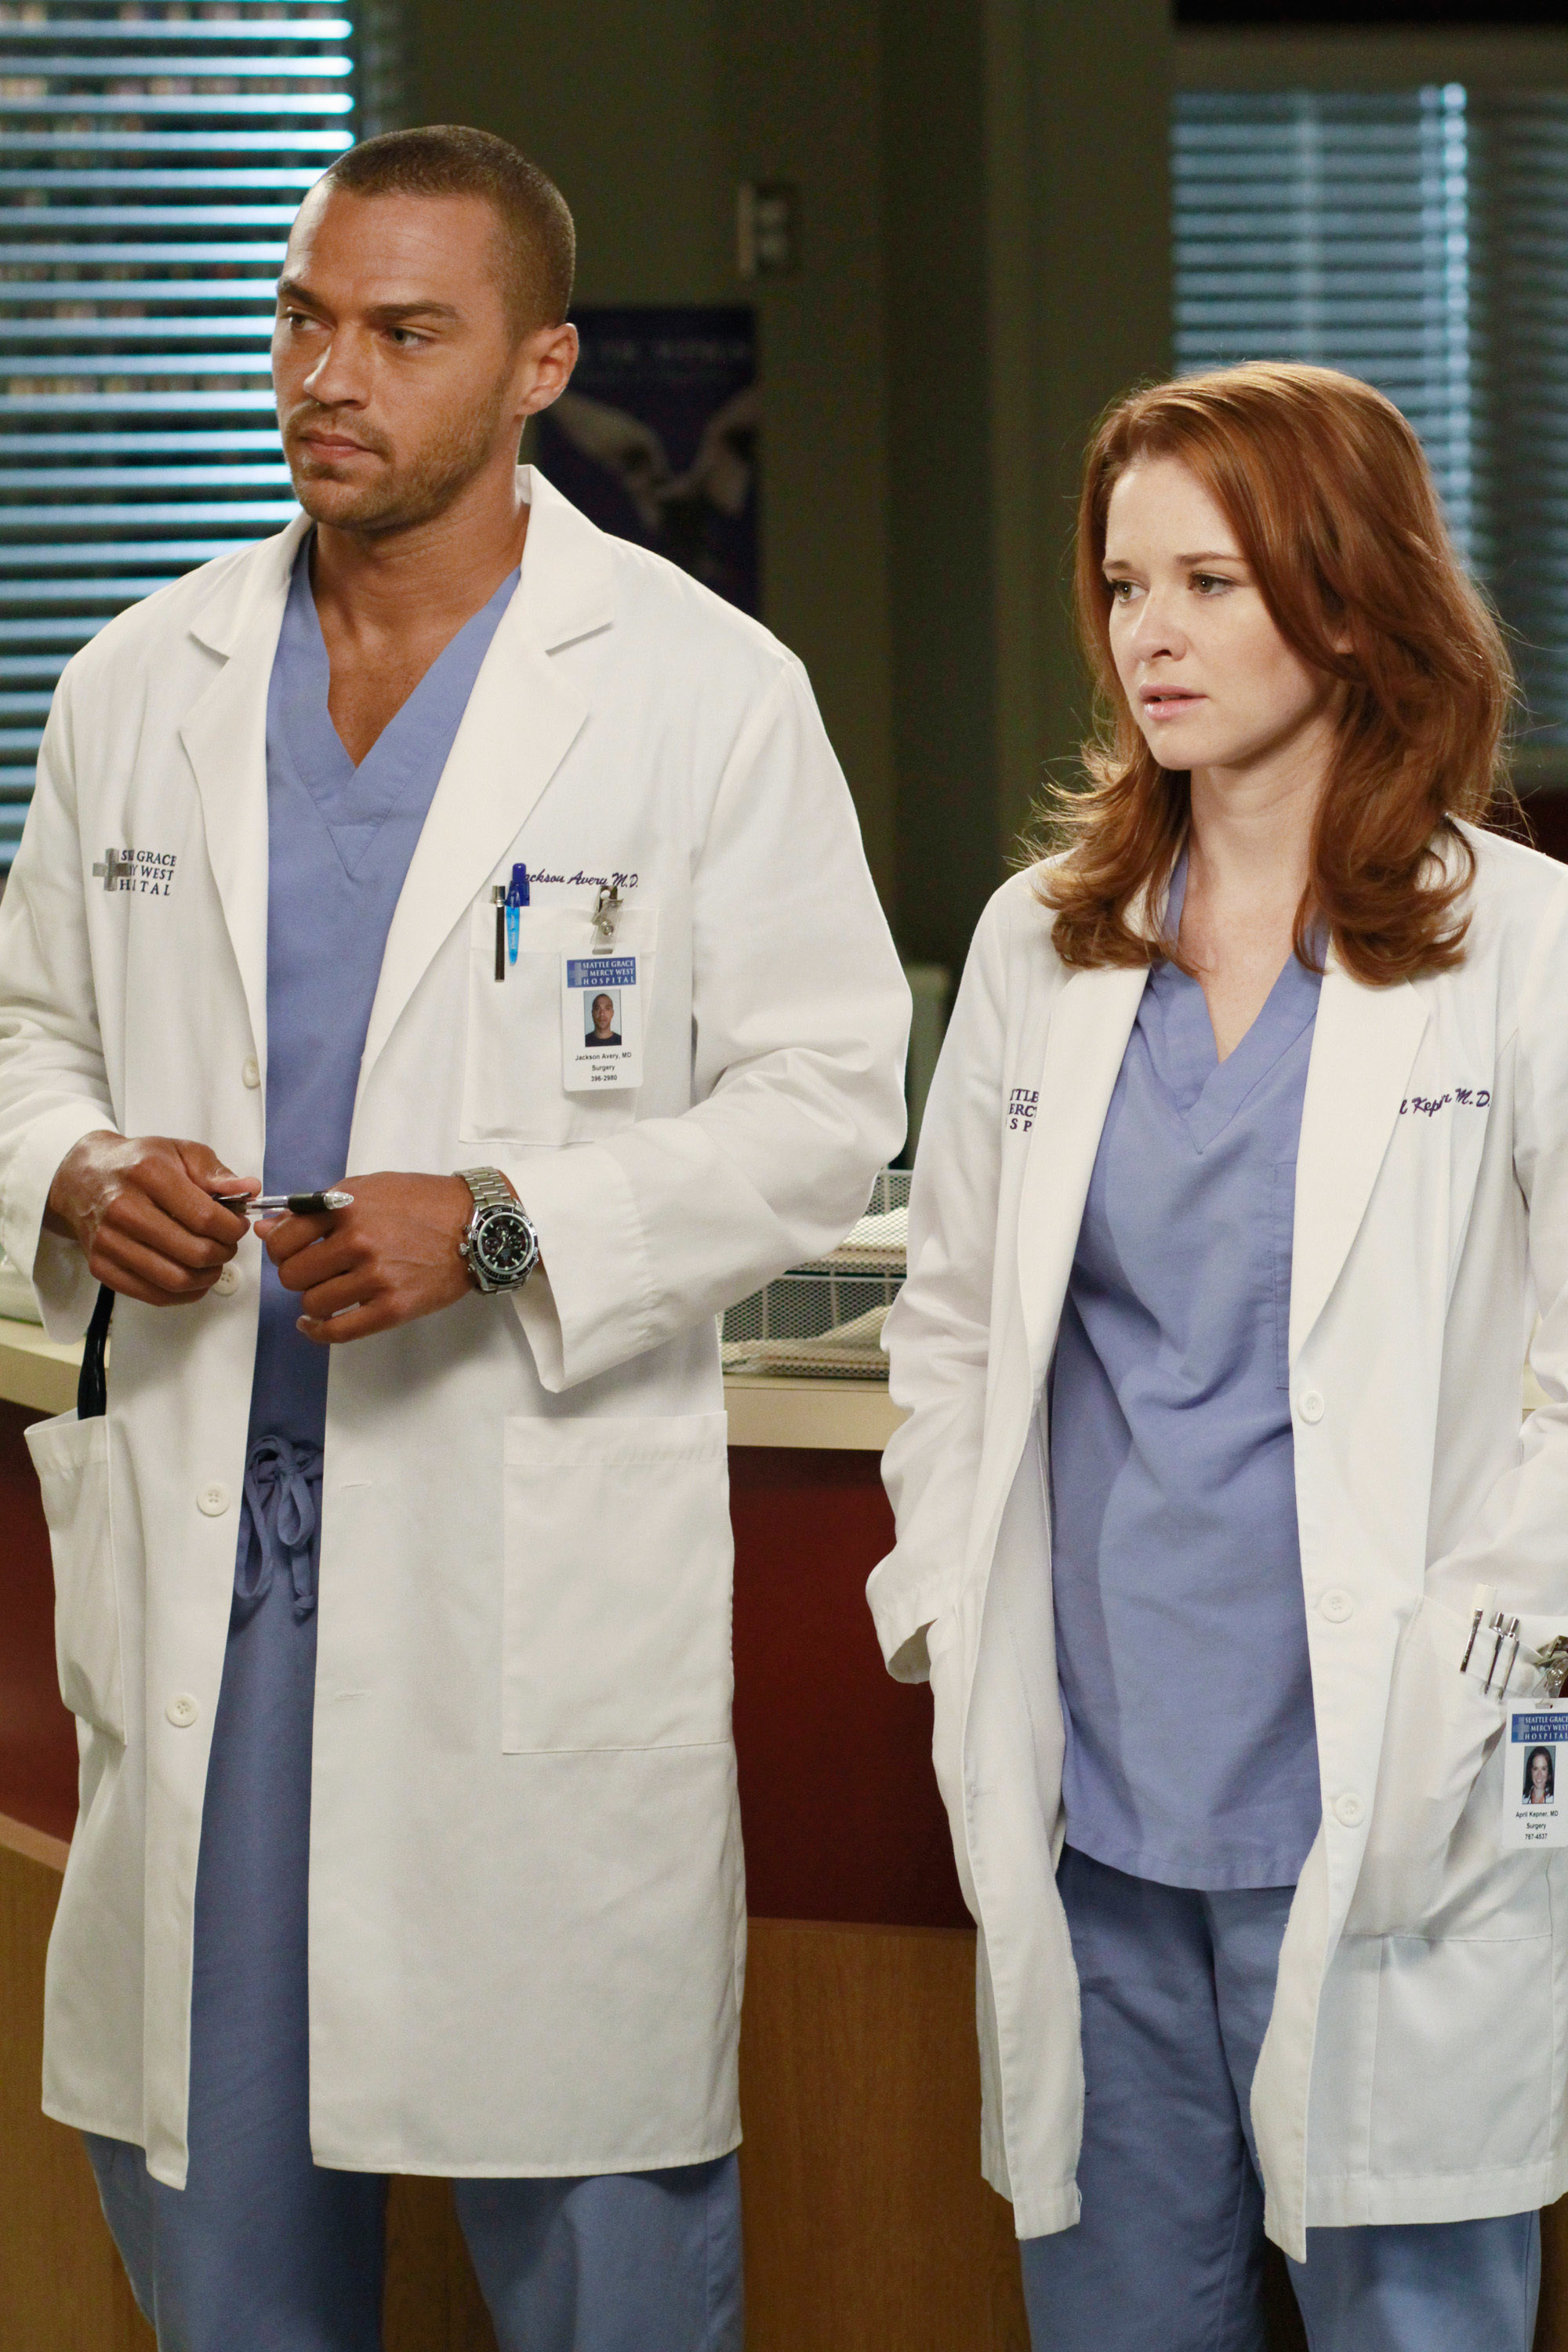 Two actors in medical attire on the set of a hospital-themed TV show